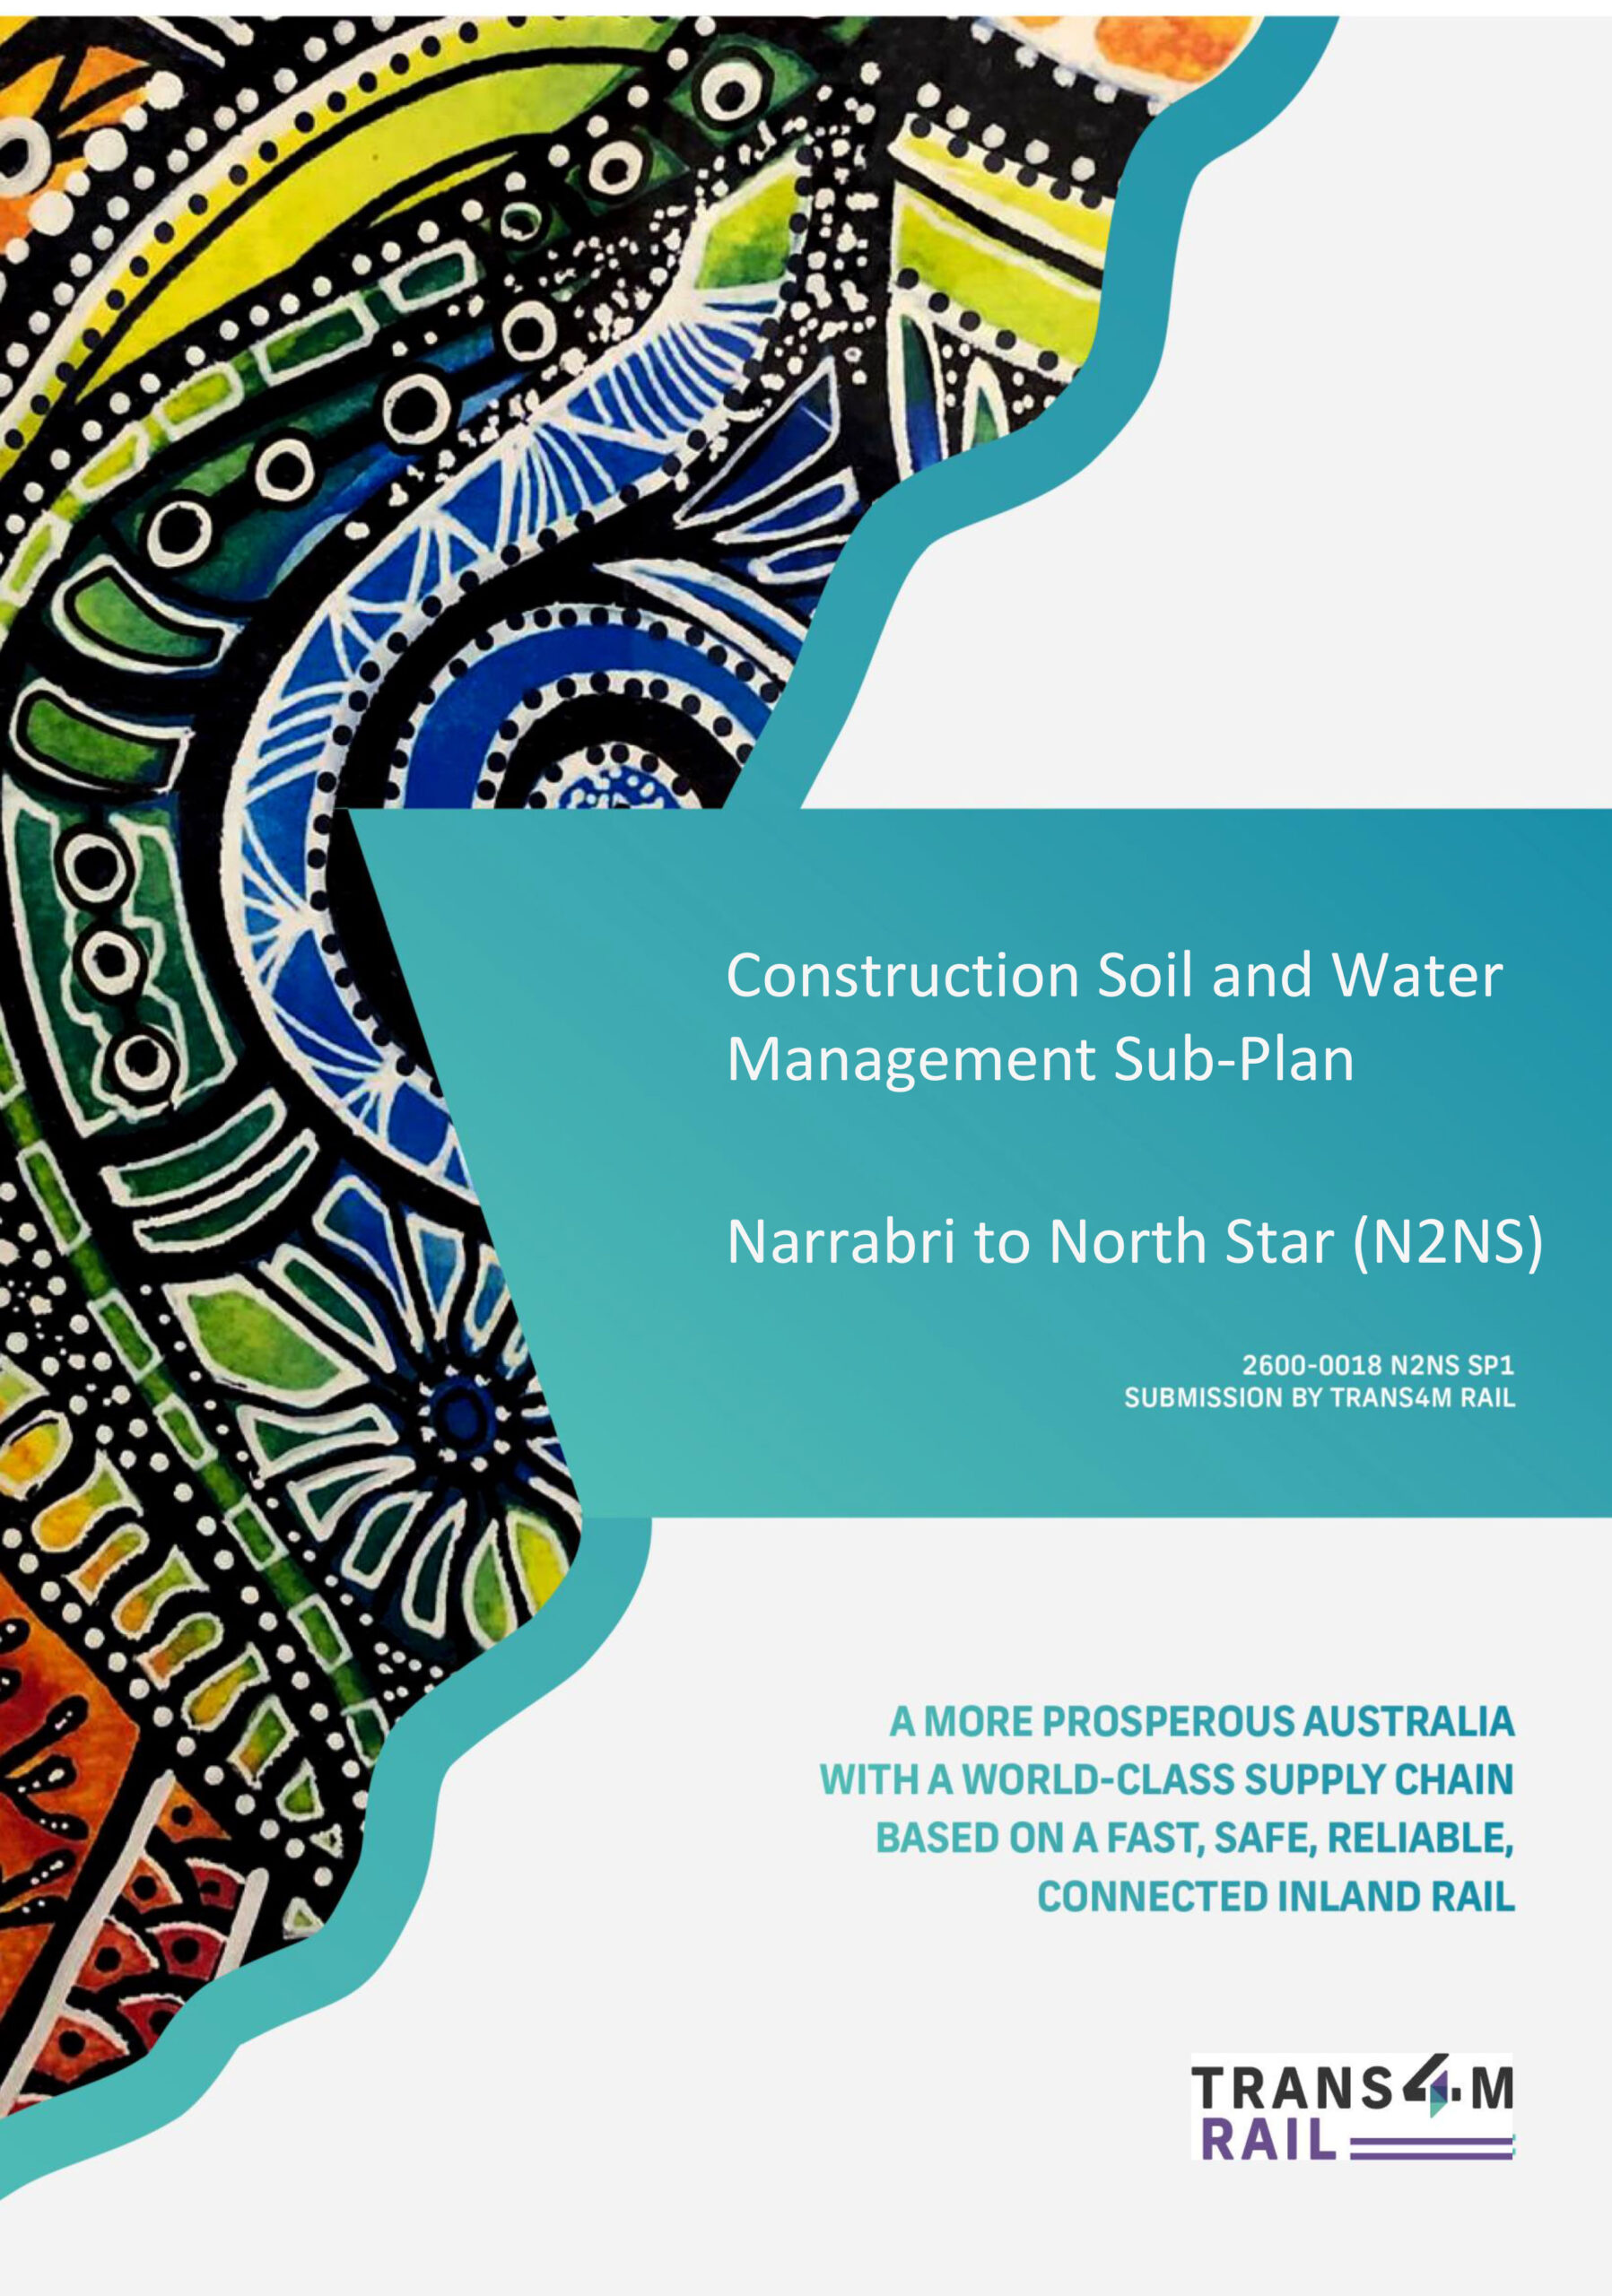 Image thumbnail for Narrabri to North Star Phase 1 Construction Soil and Water Management Sub Plan - Revision 4